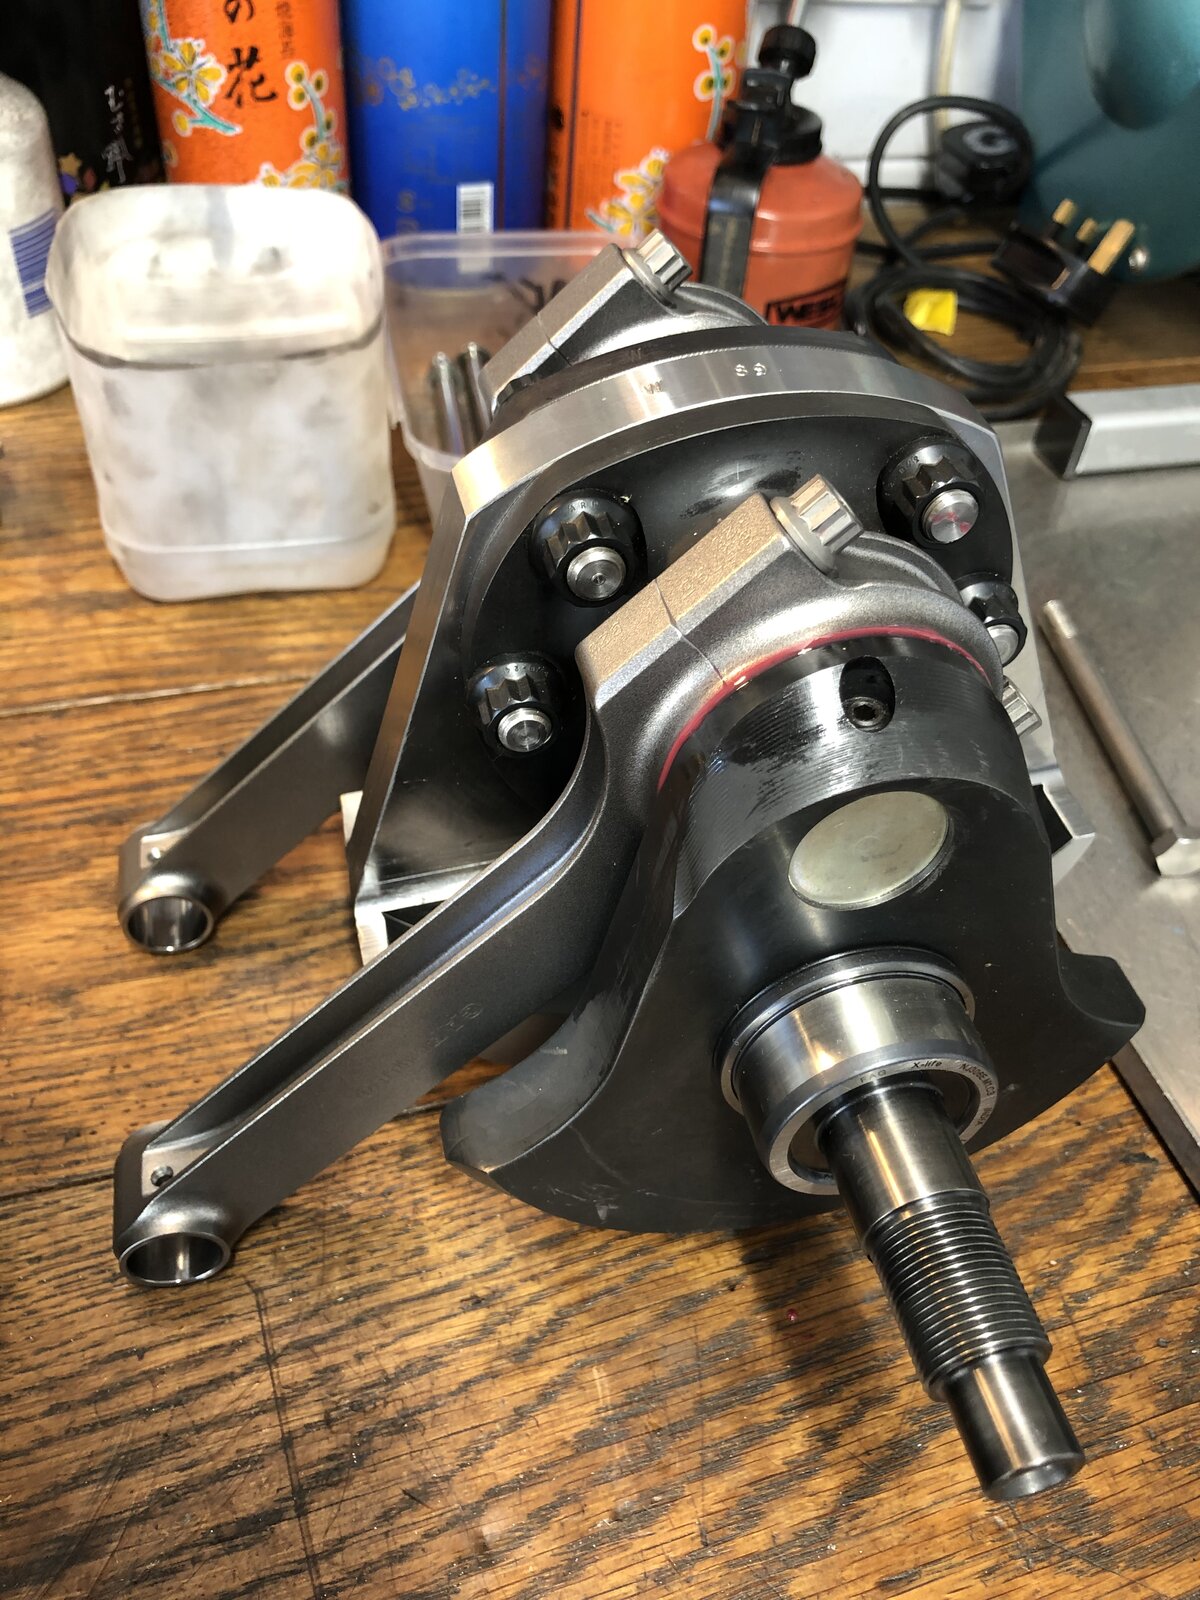 750 Commando Crankshaft reassembly hardware question: Is new hardware really needed?